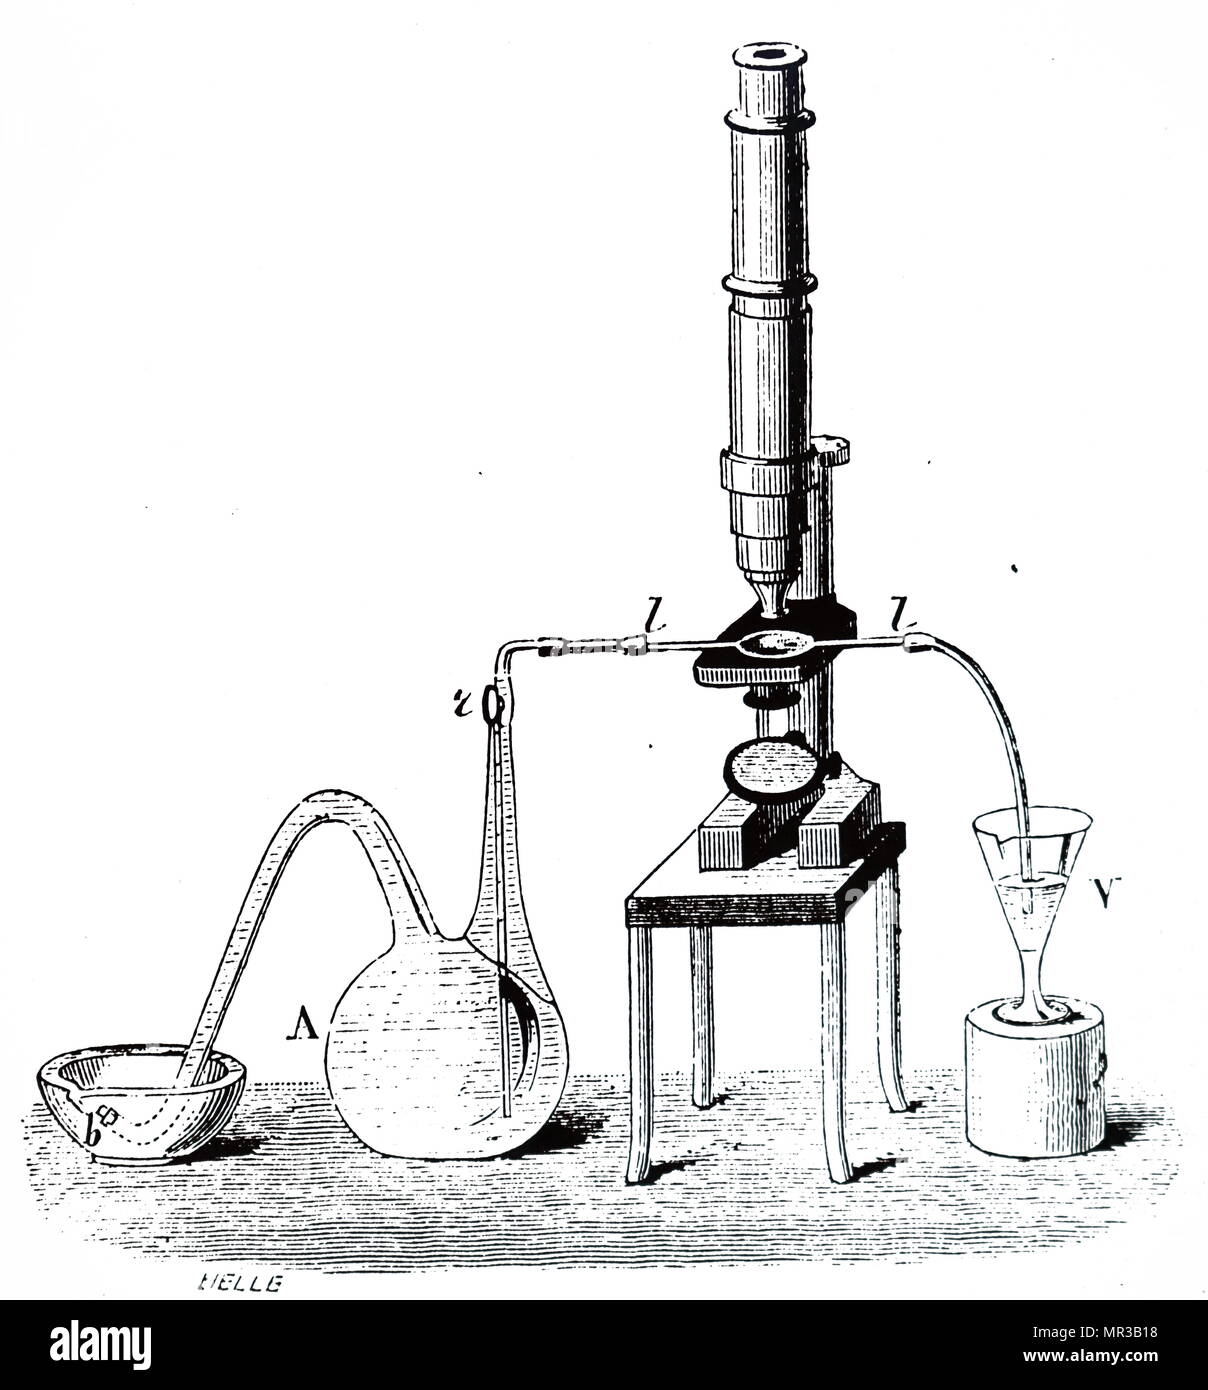 Engraving depicting Louis Pasteur's first apparatus for cooling and fermenting wort during his work on beer. Louis Pasteur (1822-1895) a French biologist, microbiologist and chemist renowned for his discoveries of the principles of vaccination, microbial fermentation and pasteurisation. Dated 19th century Stock Photo